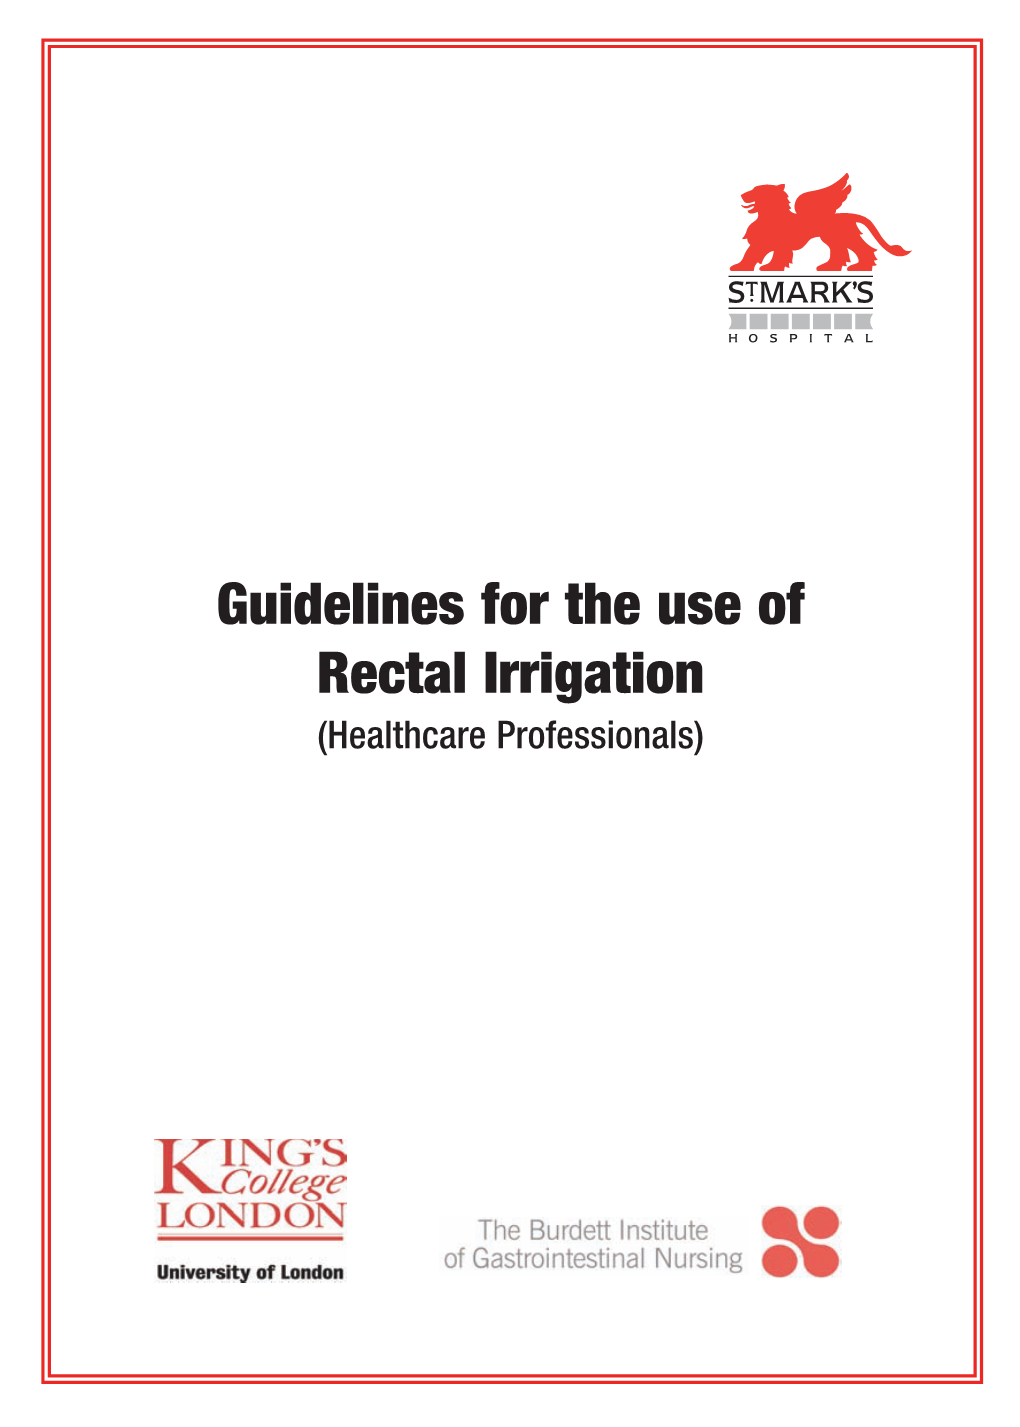 Guidelines for the Use of Rectal Irrigation